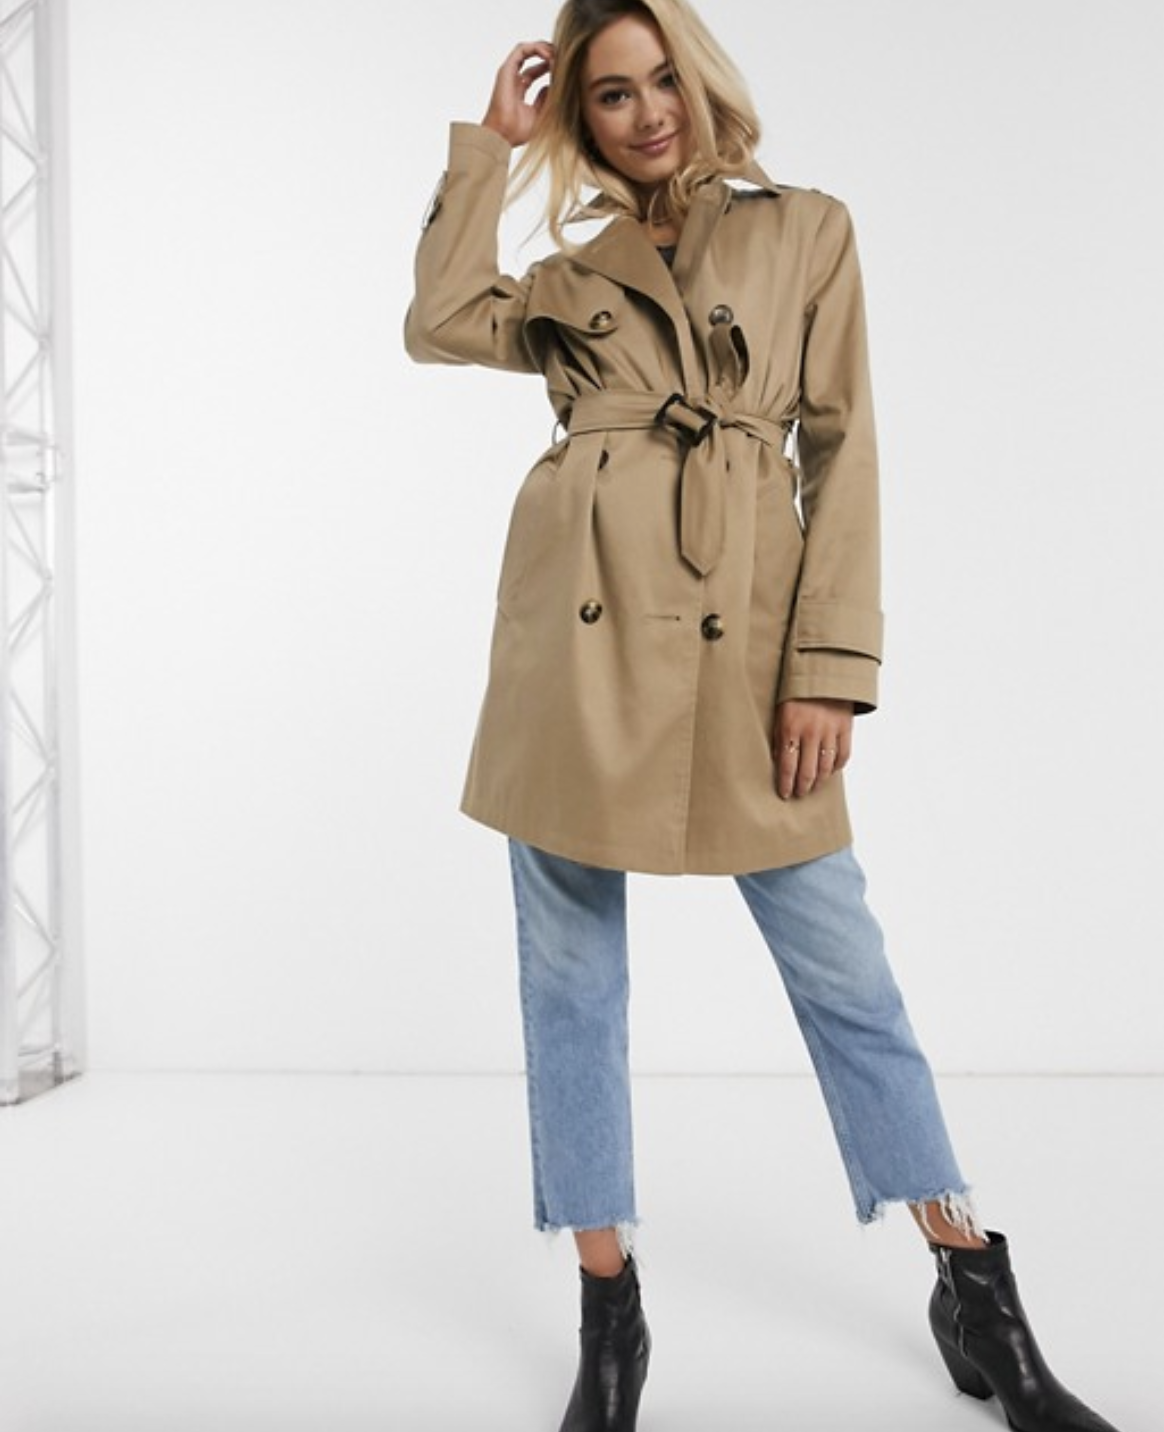 Trench coat in a stone color with a belt